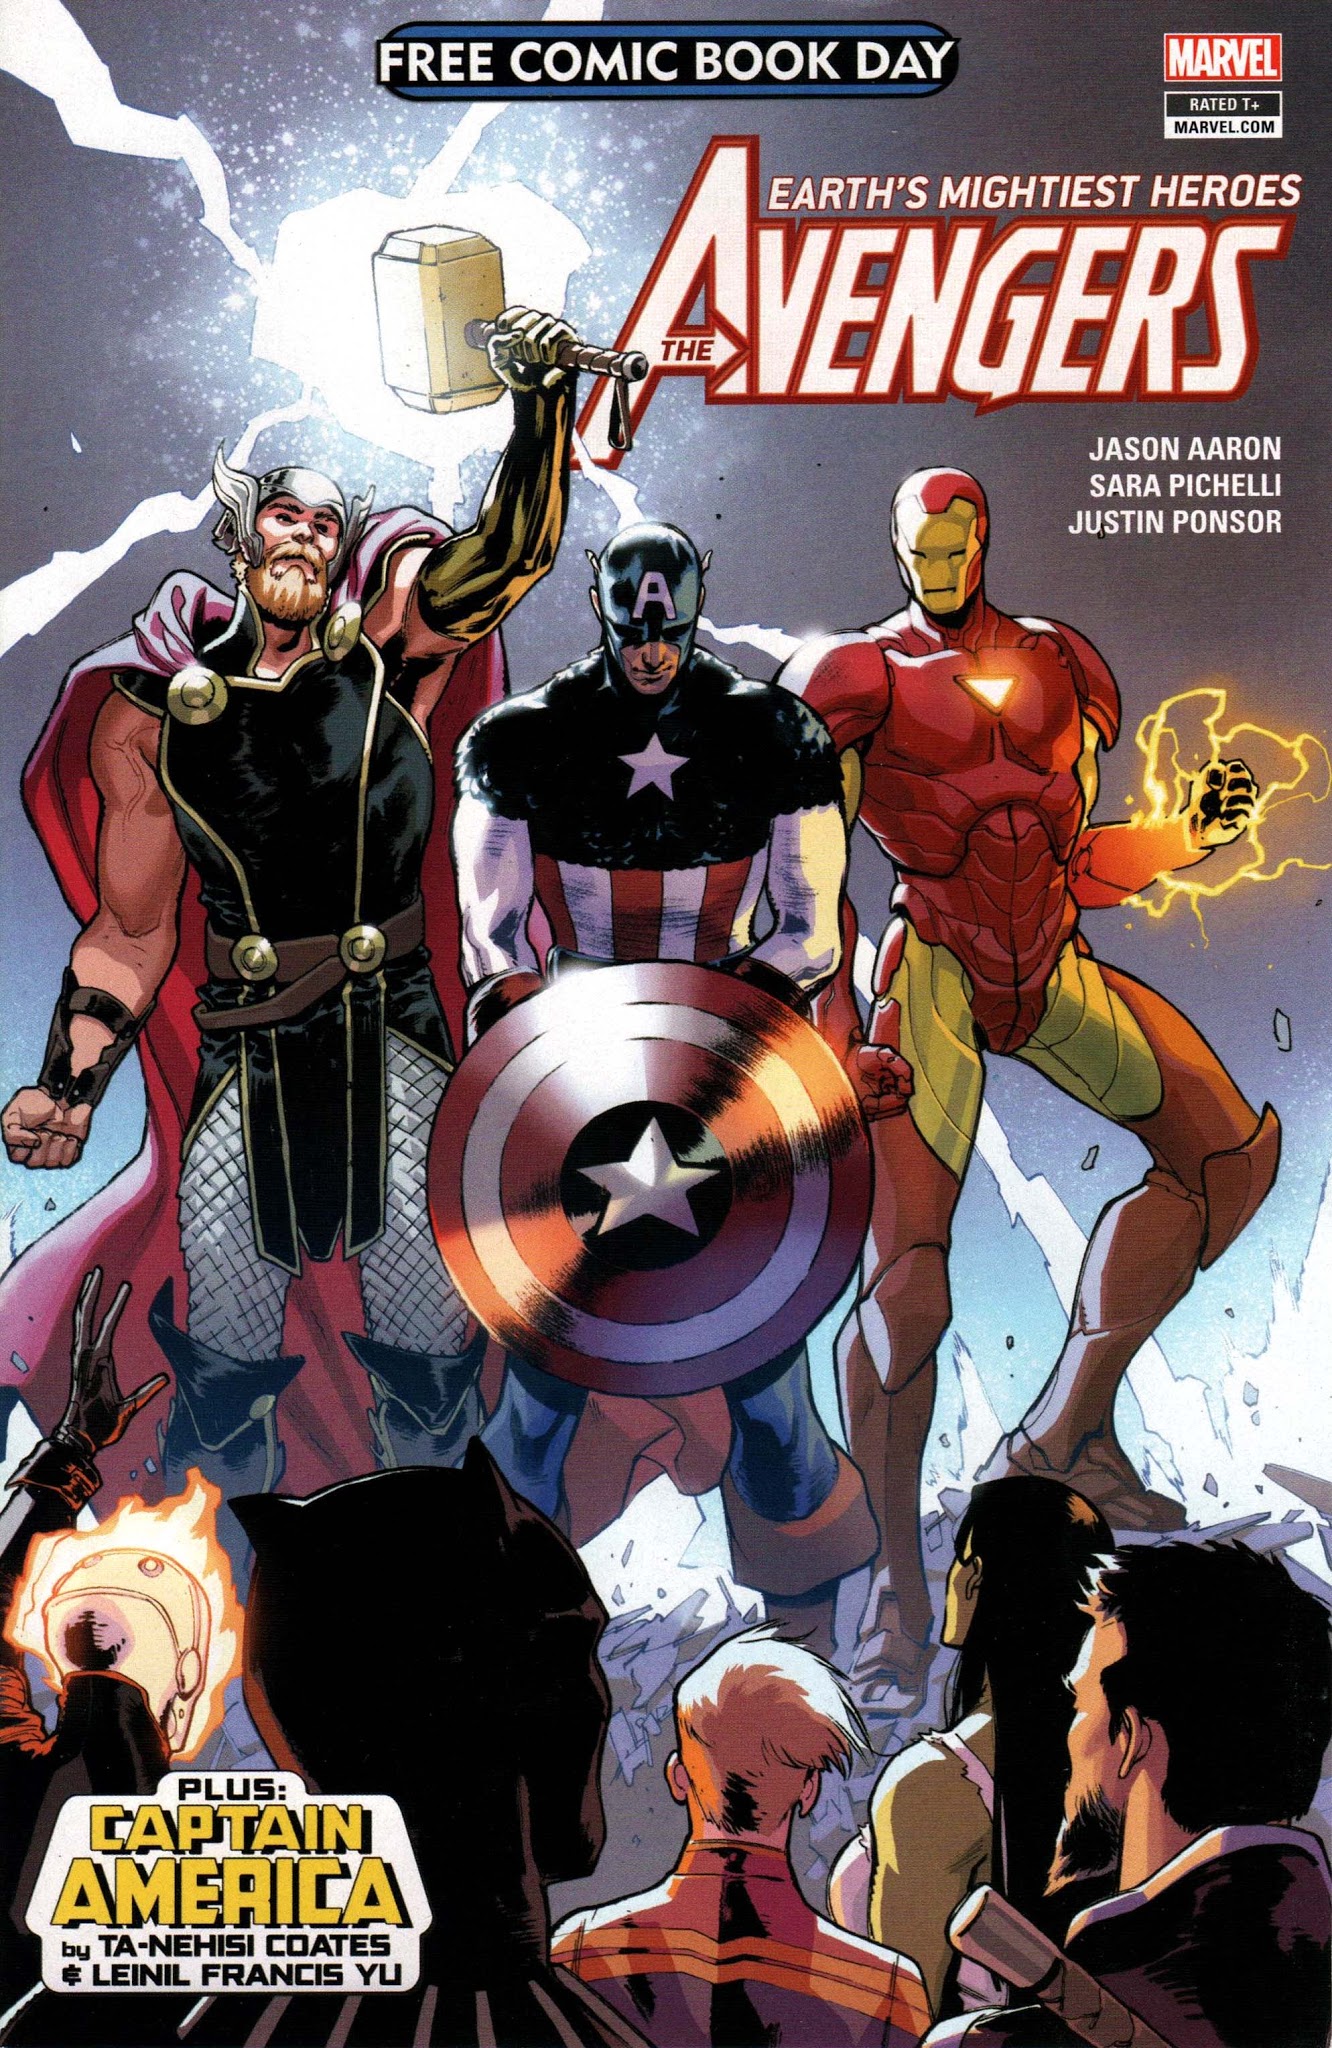 Read online Free Comic Book Day 2018 comic -  Issue # Avengers - Captain America - 1